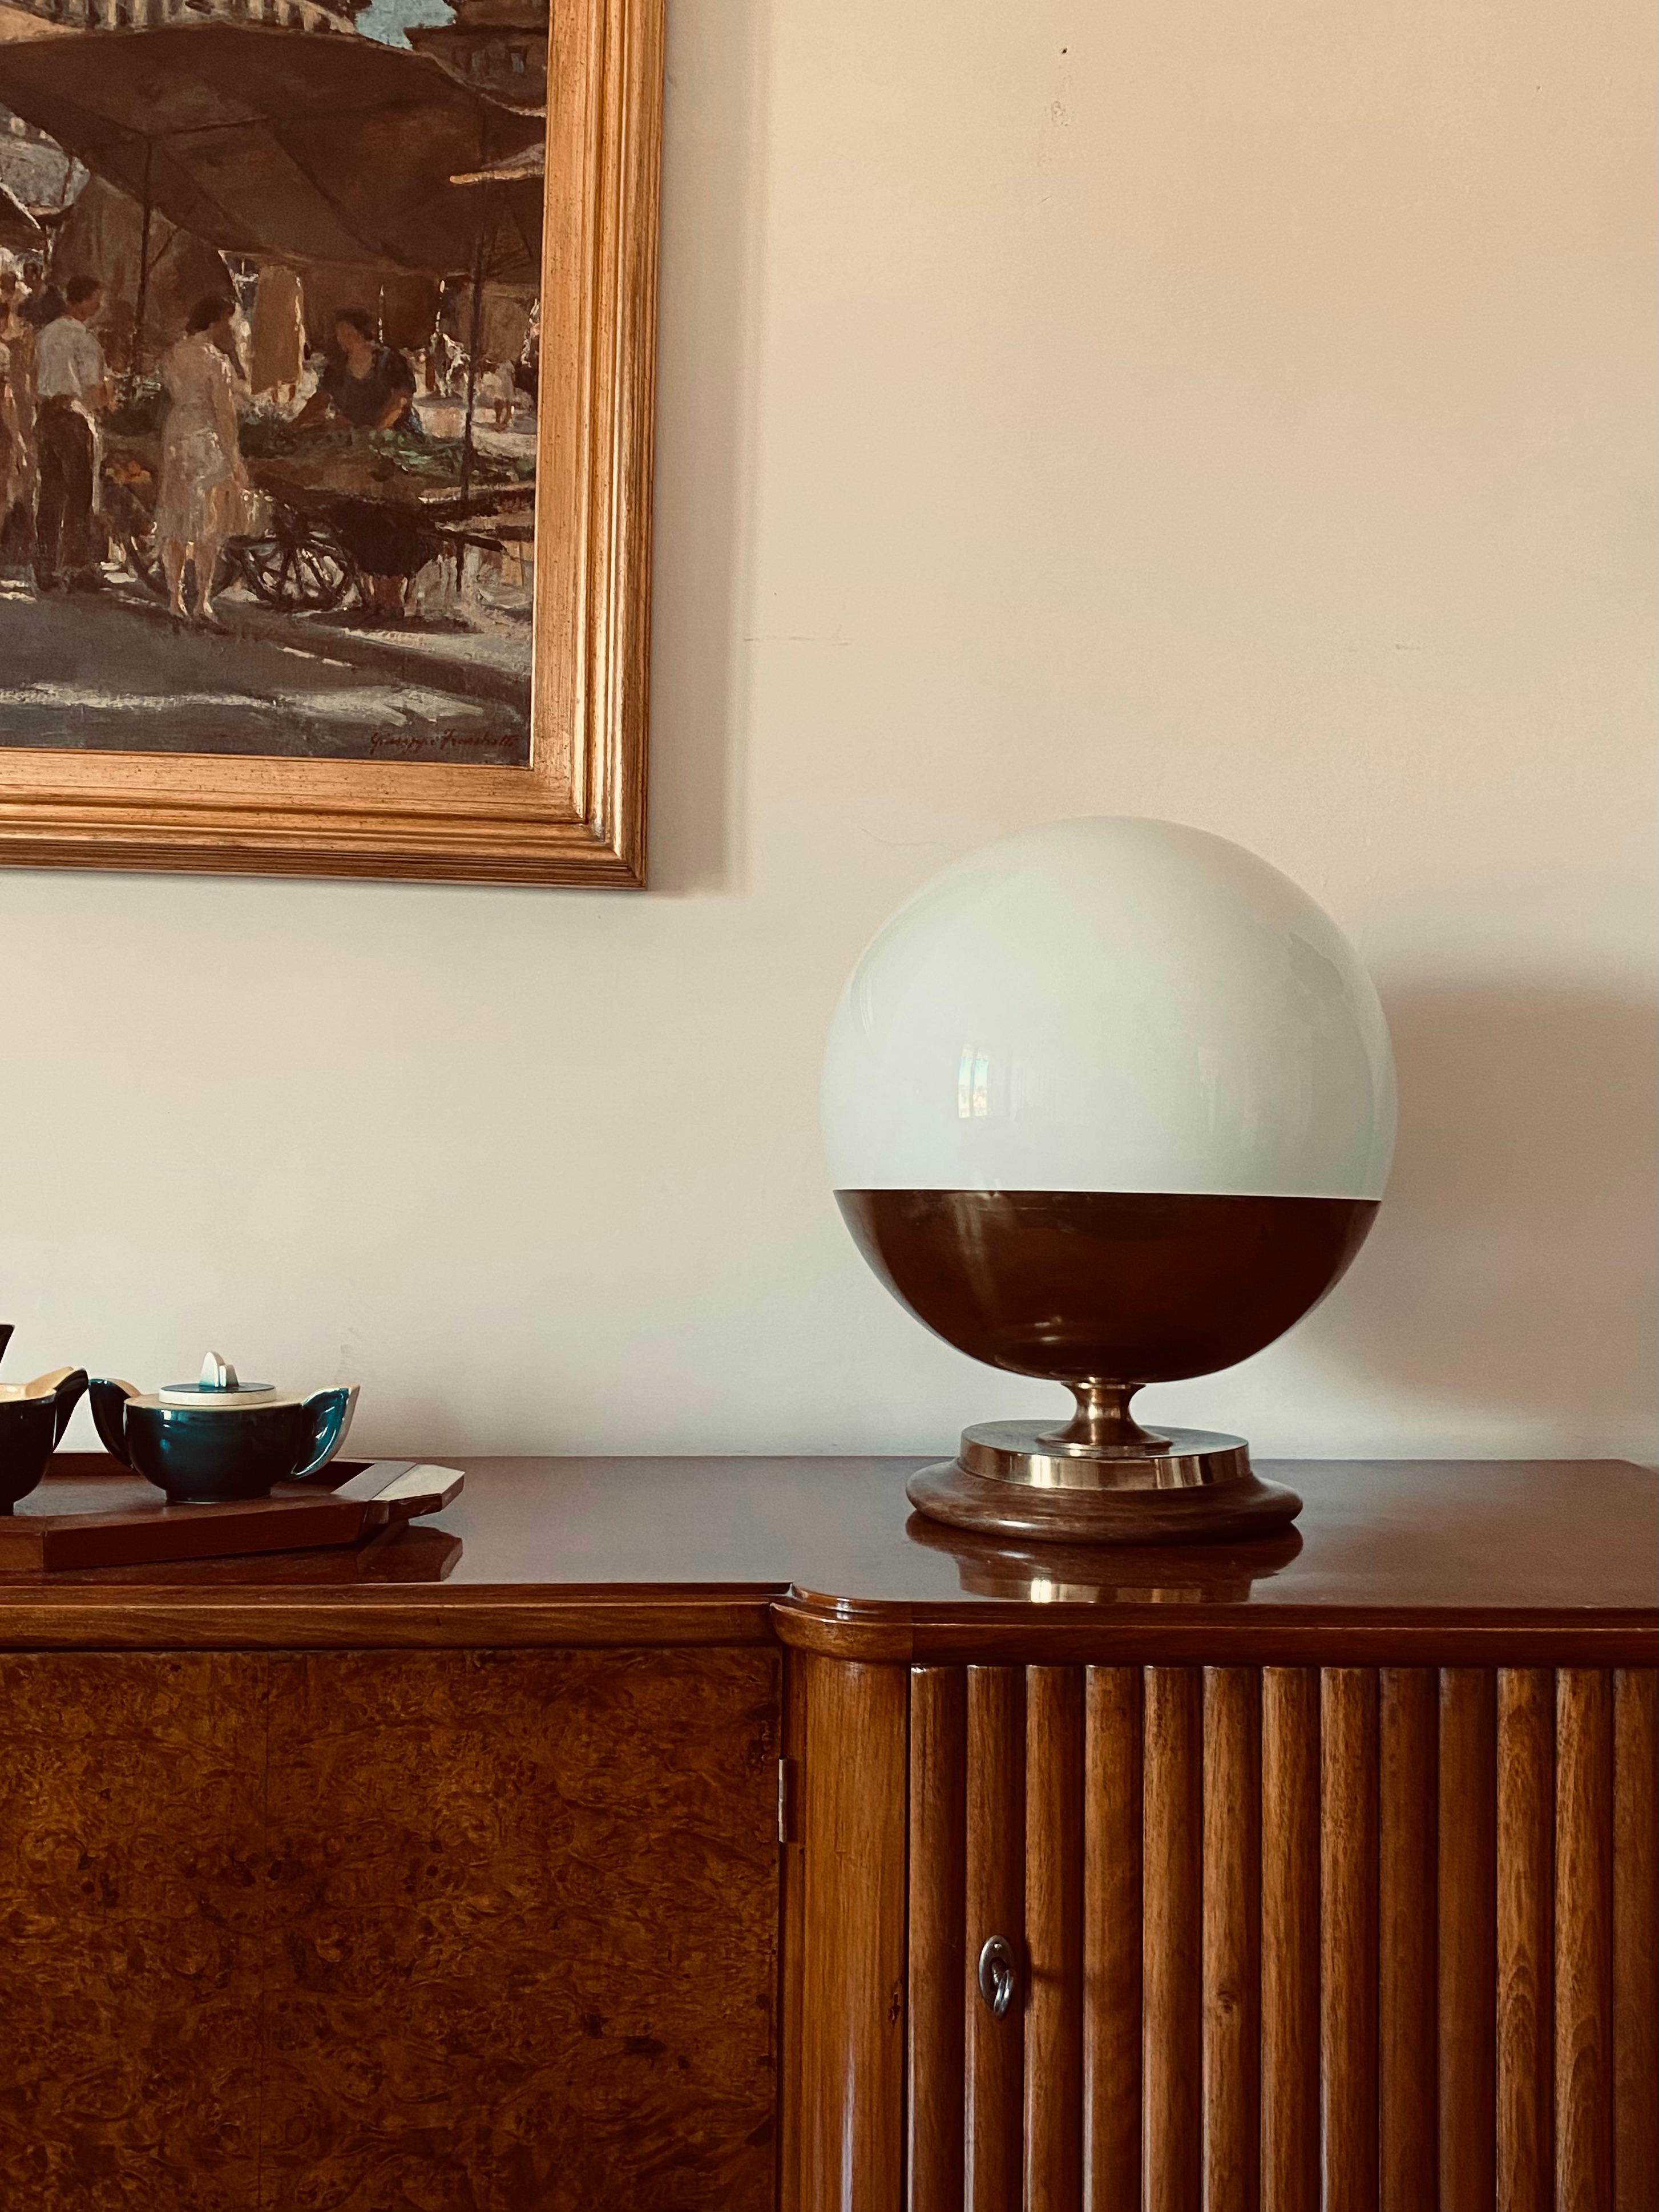 Important midcentury spherical murano glass table lamp.

Italian manufacture, Mazzega Italy 1960s

Wood and brass base, frosted glass

Measures : 45 cm H - 36 cm diam.

Conditions: Excellent consistent with age and use. No defects.